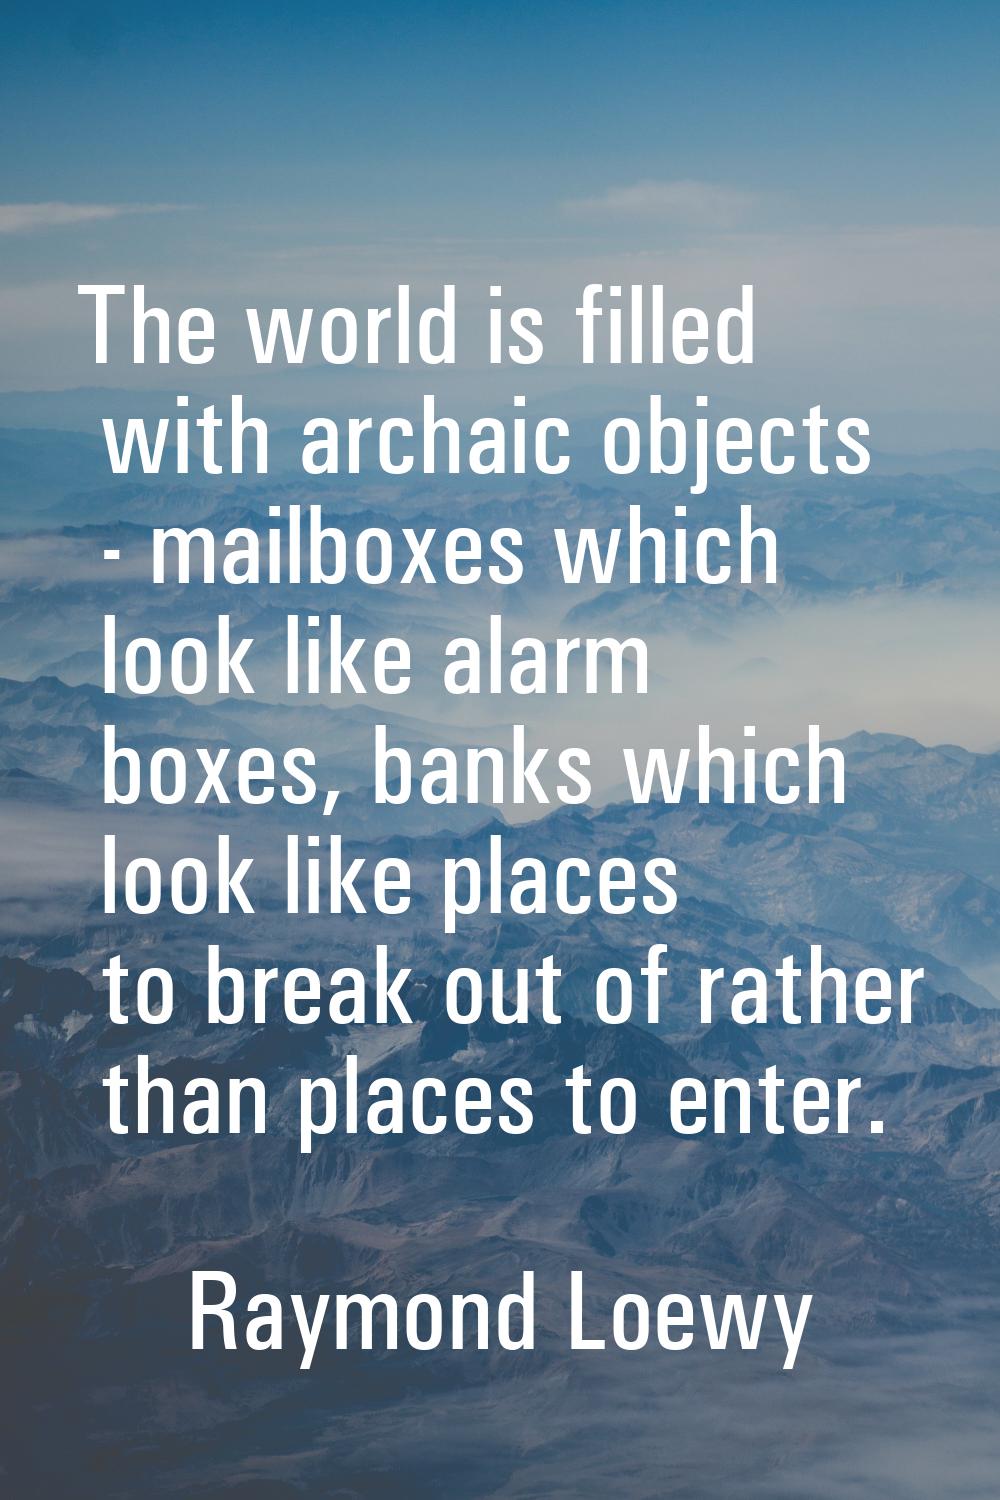 The world is filled with archaic objects - mailboxes which look like alarm boxes, banks which look 